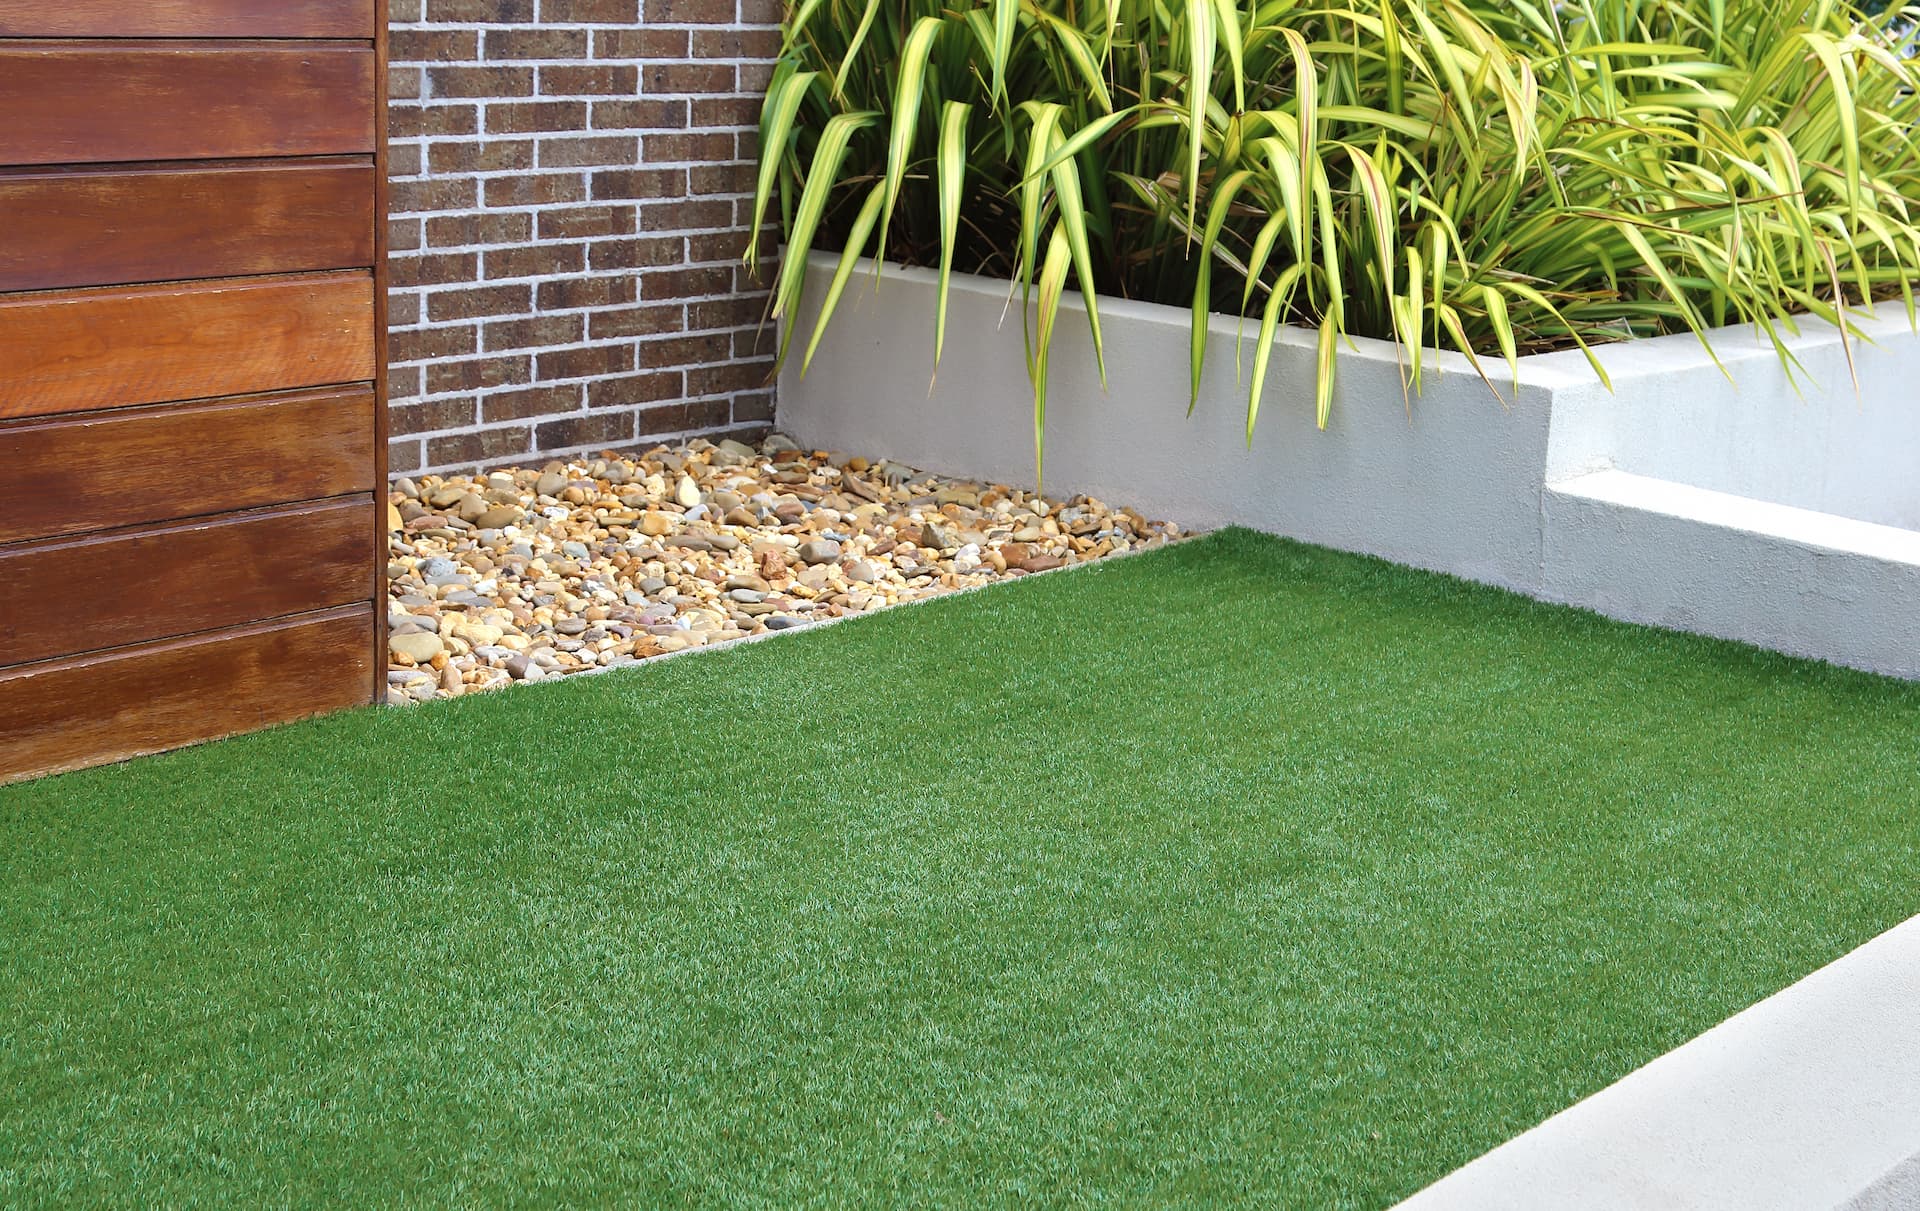 Licenced Artificial Grass & Turf services in Hale Barns